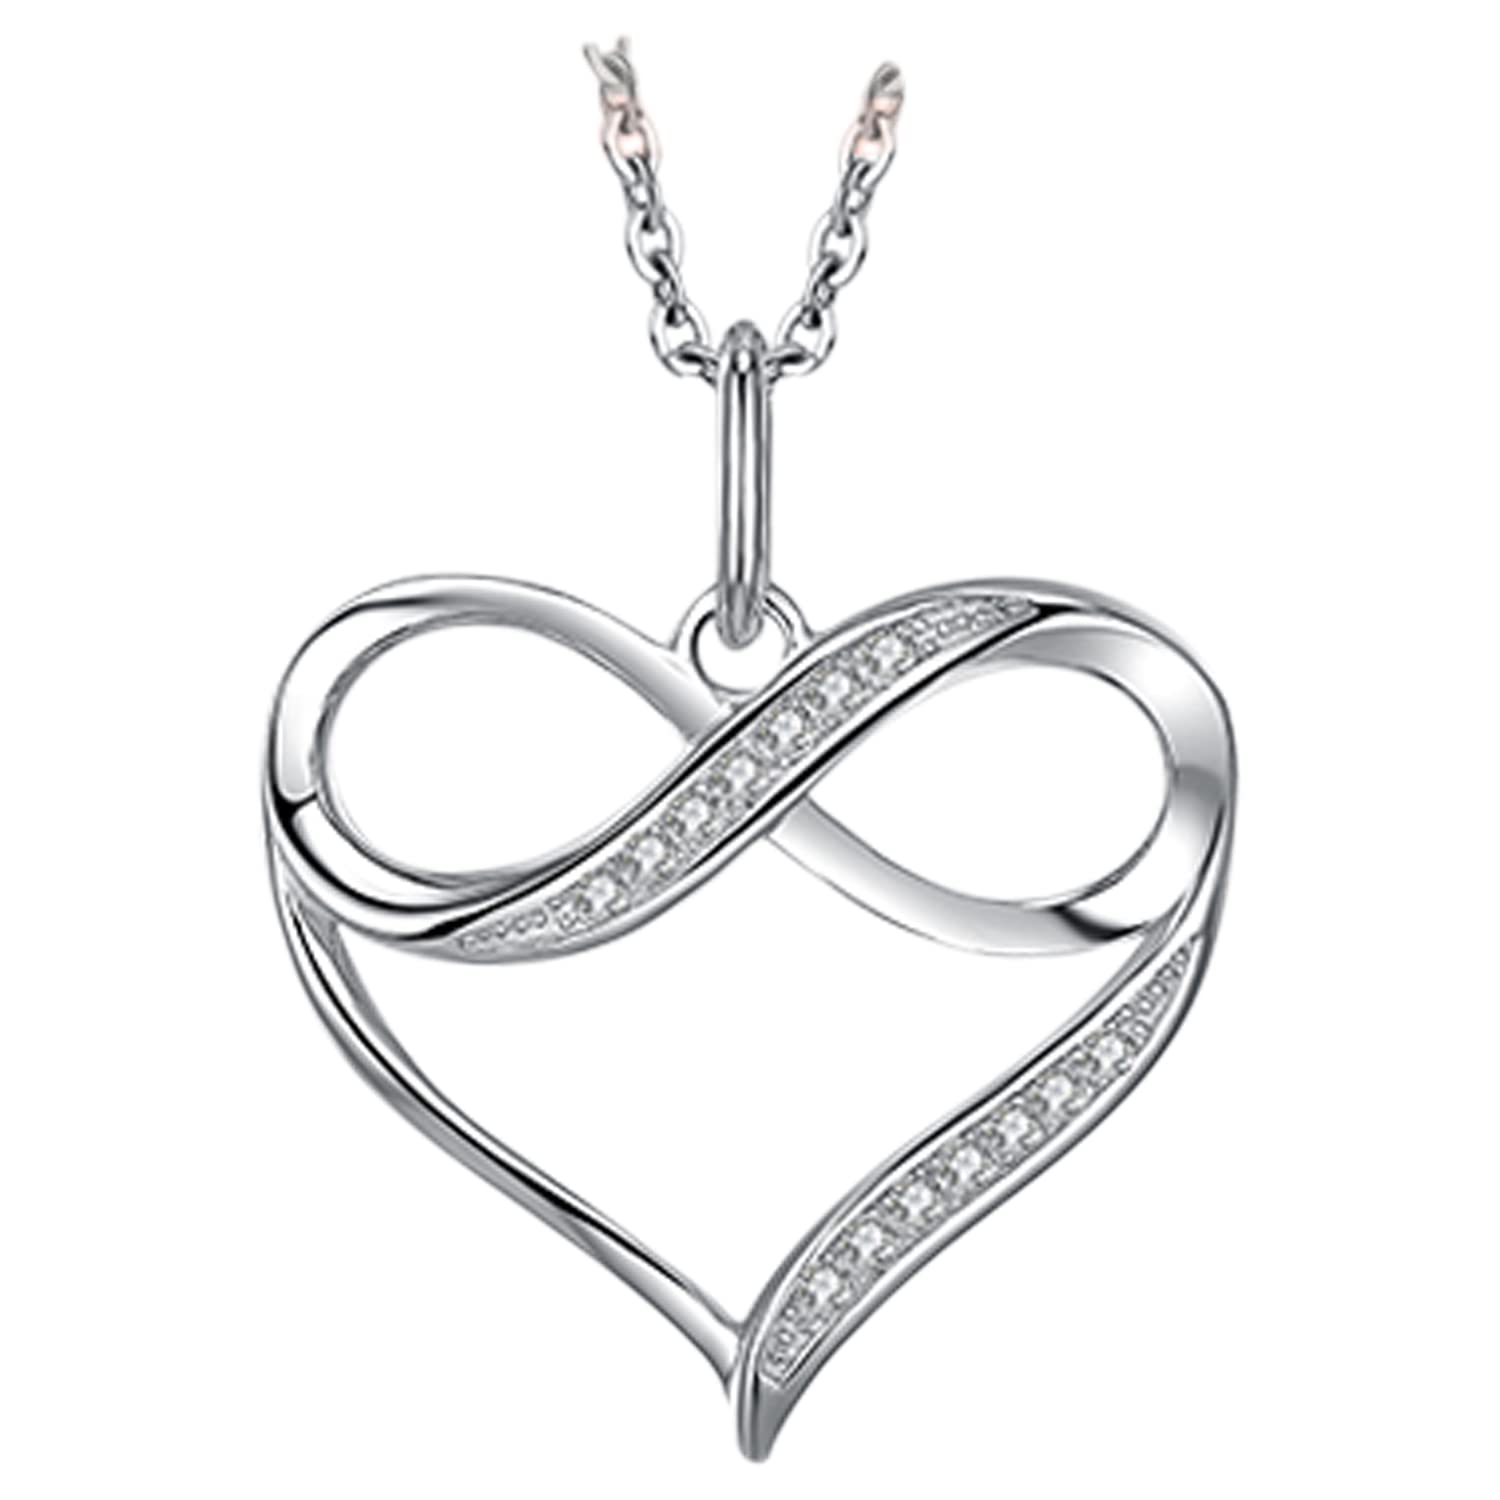 Ladies 925 Sterling Silver Infinity Heart Necklace Set With Cubic Zirconia Stones - Includes 45cm 925 Silver Box Chain and Jewellery Gift Box.